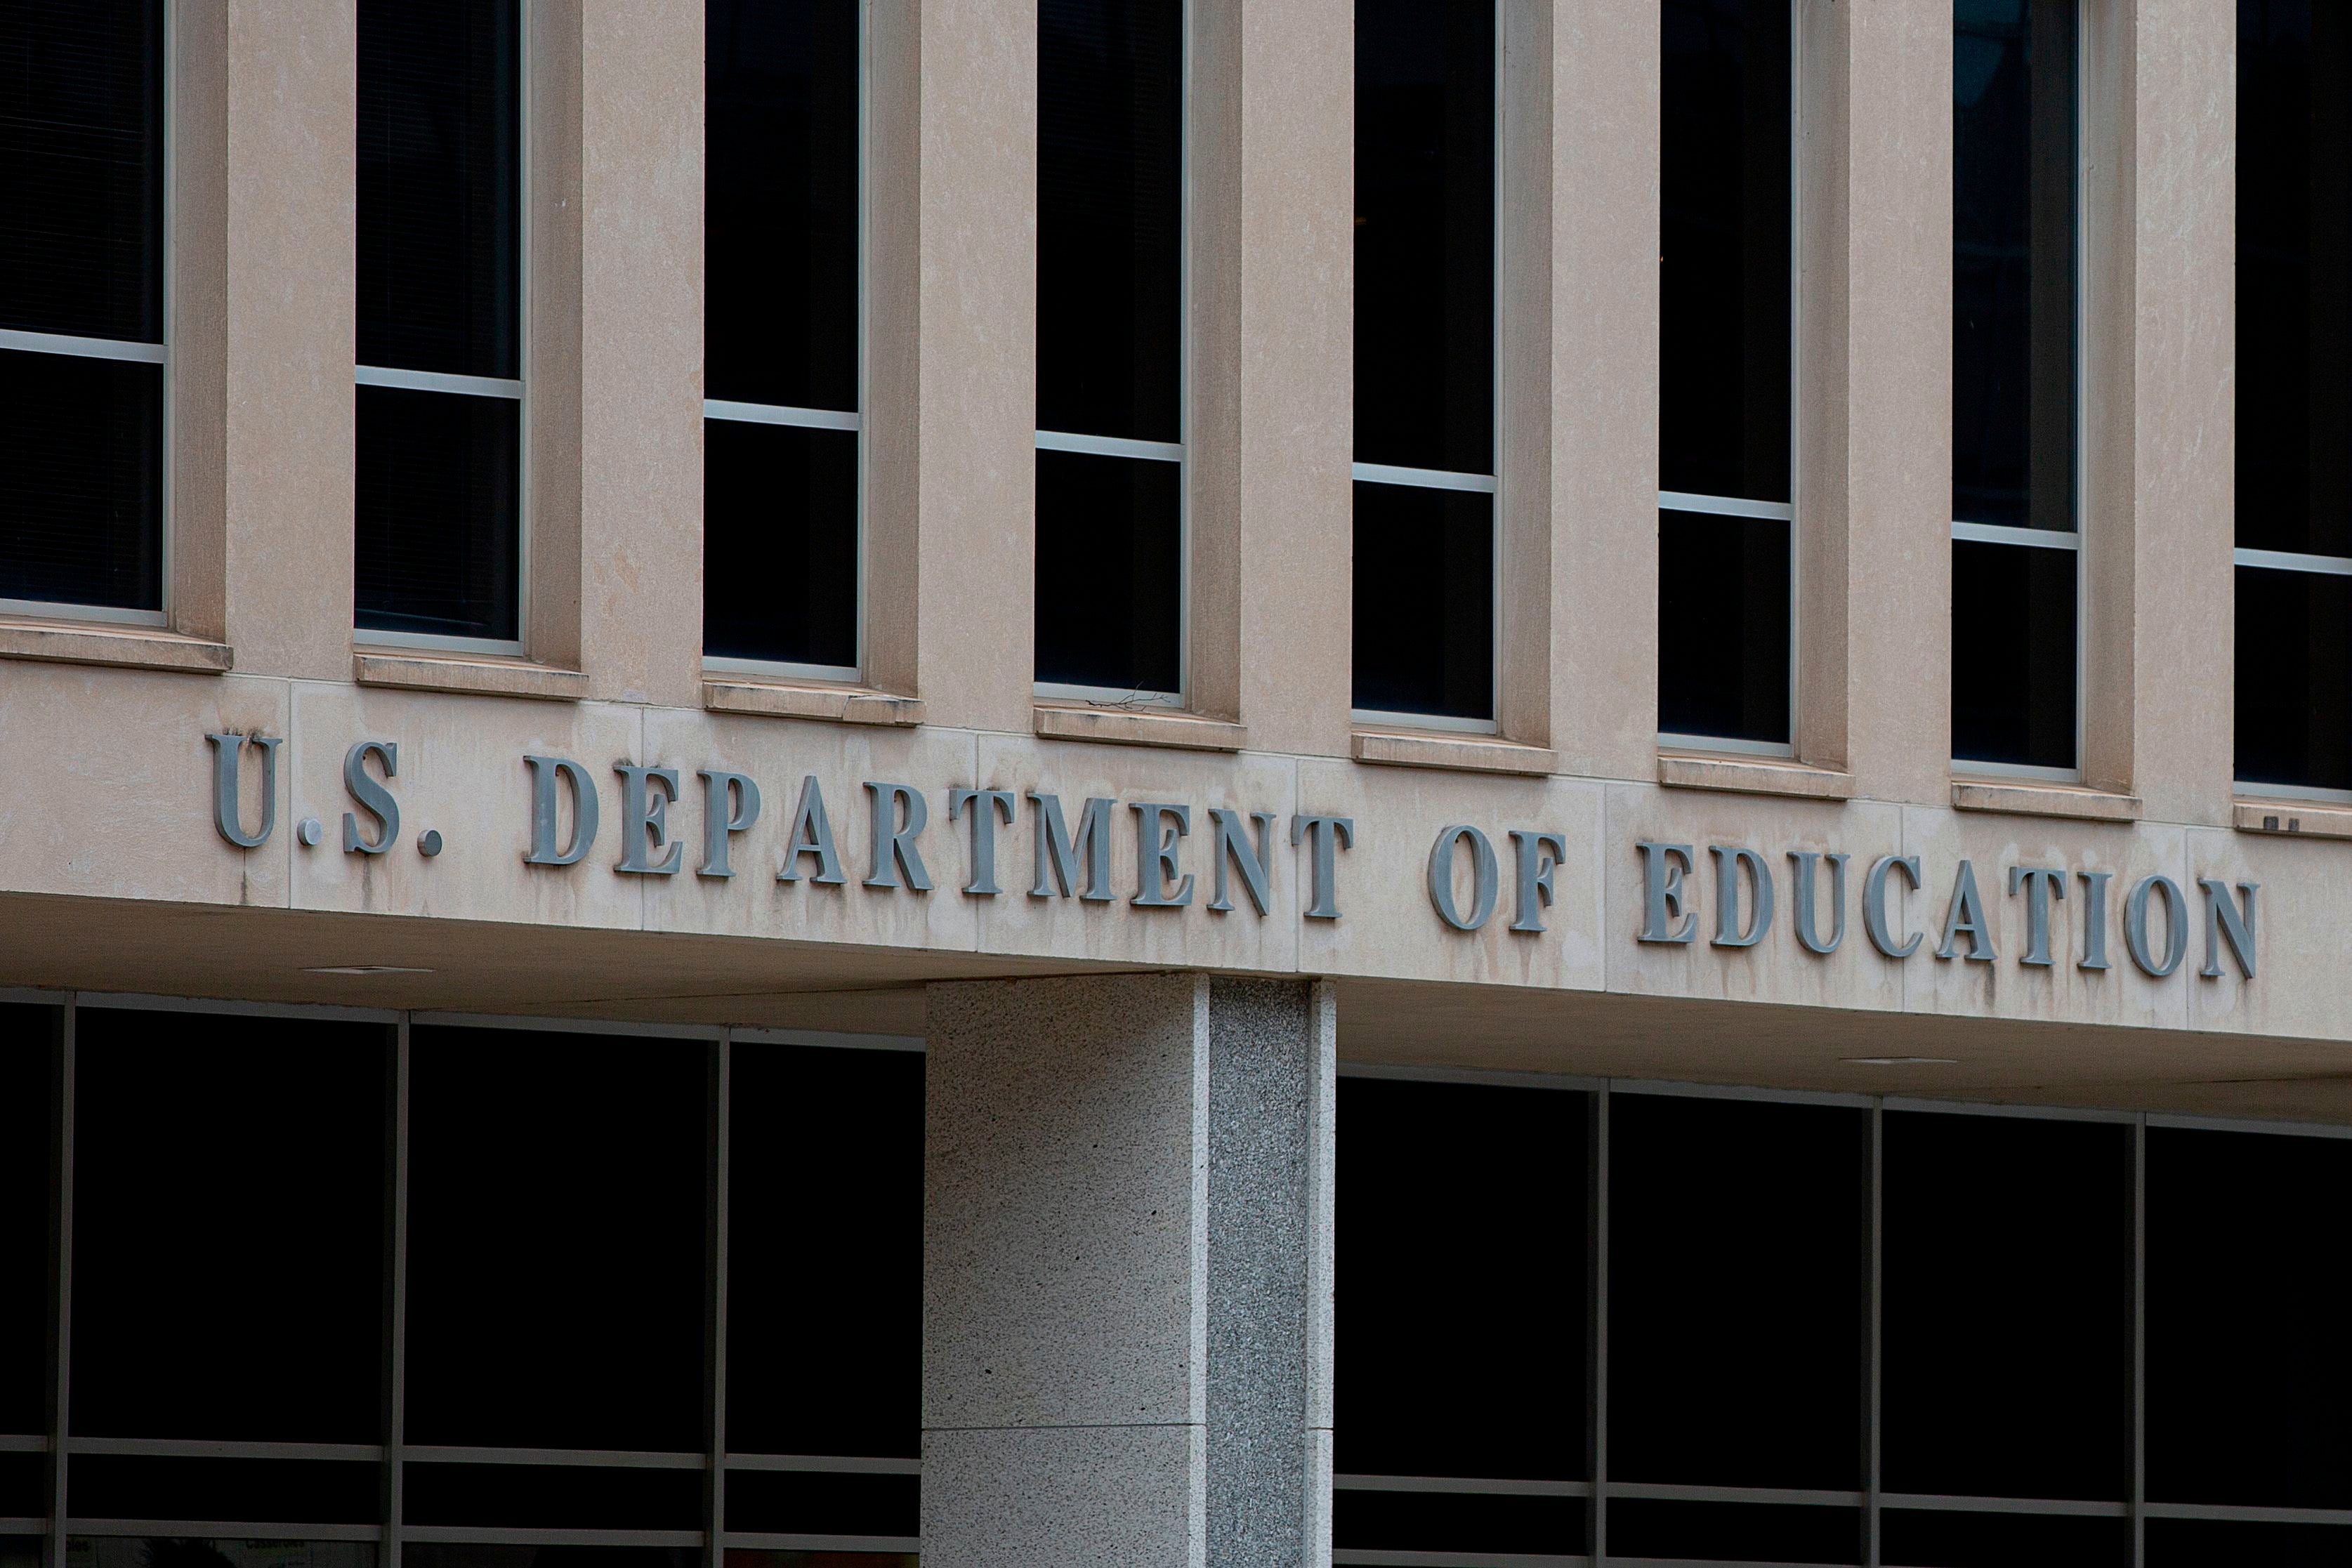 Vandalism Sparks Rumors Of Racial Motivation At Department Of Education